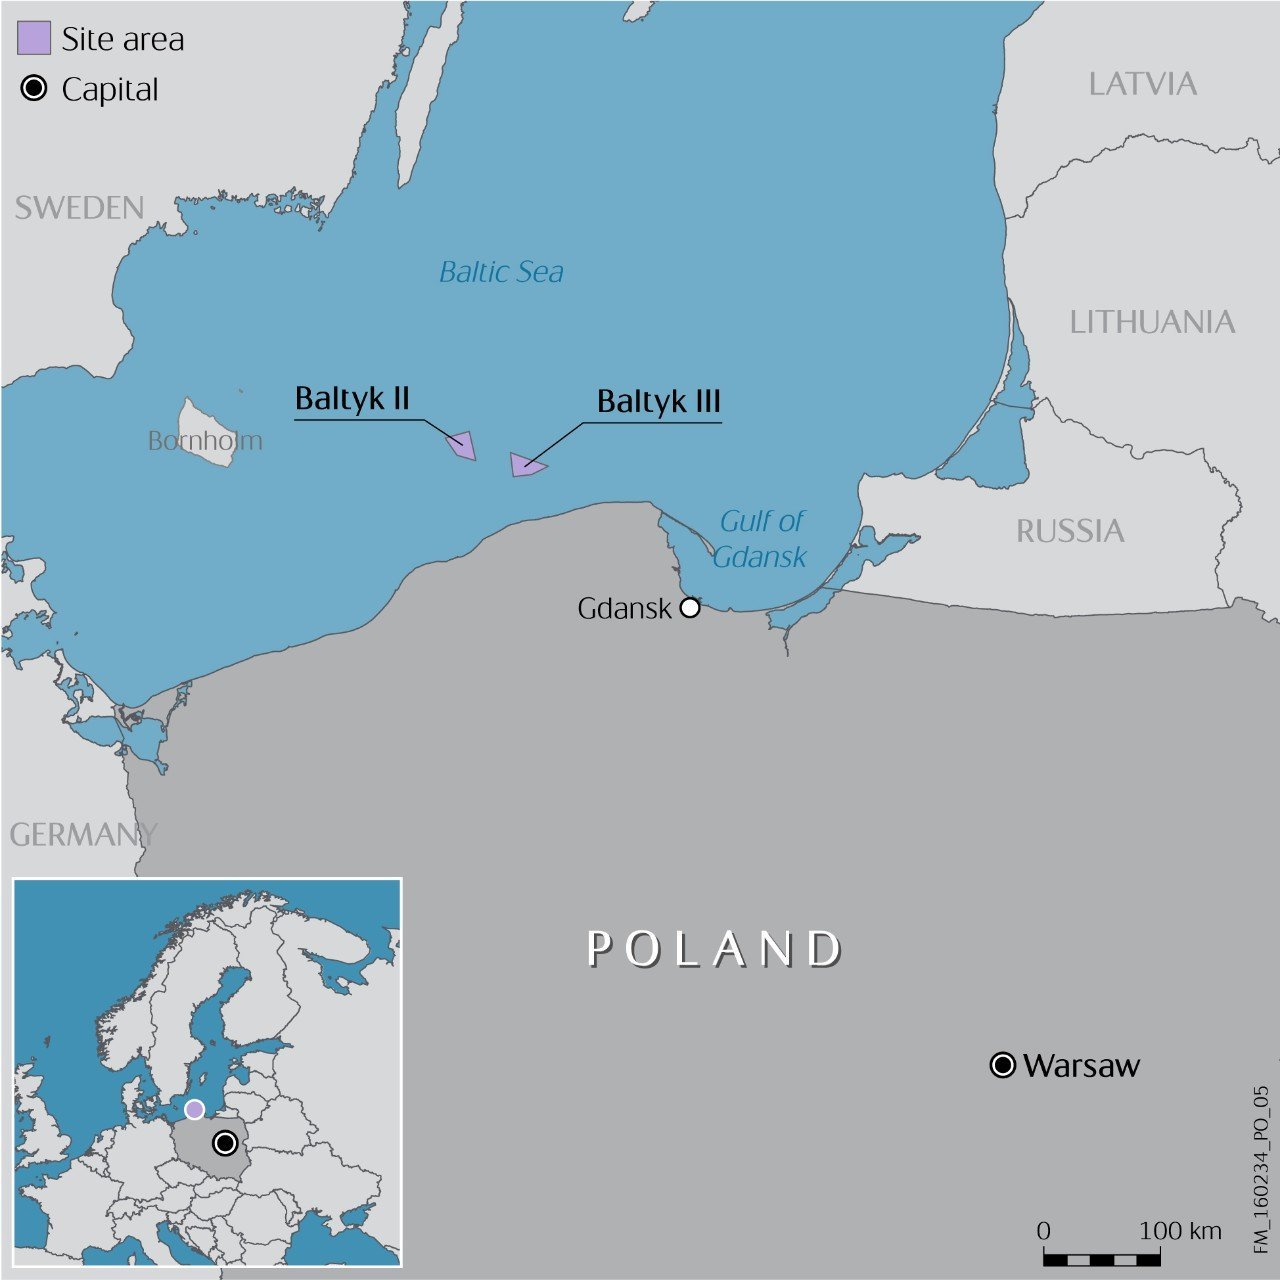 Statoil enters offshore wind in Poland